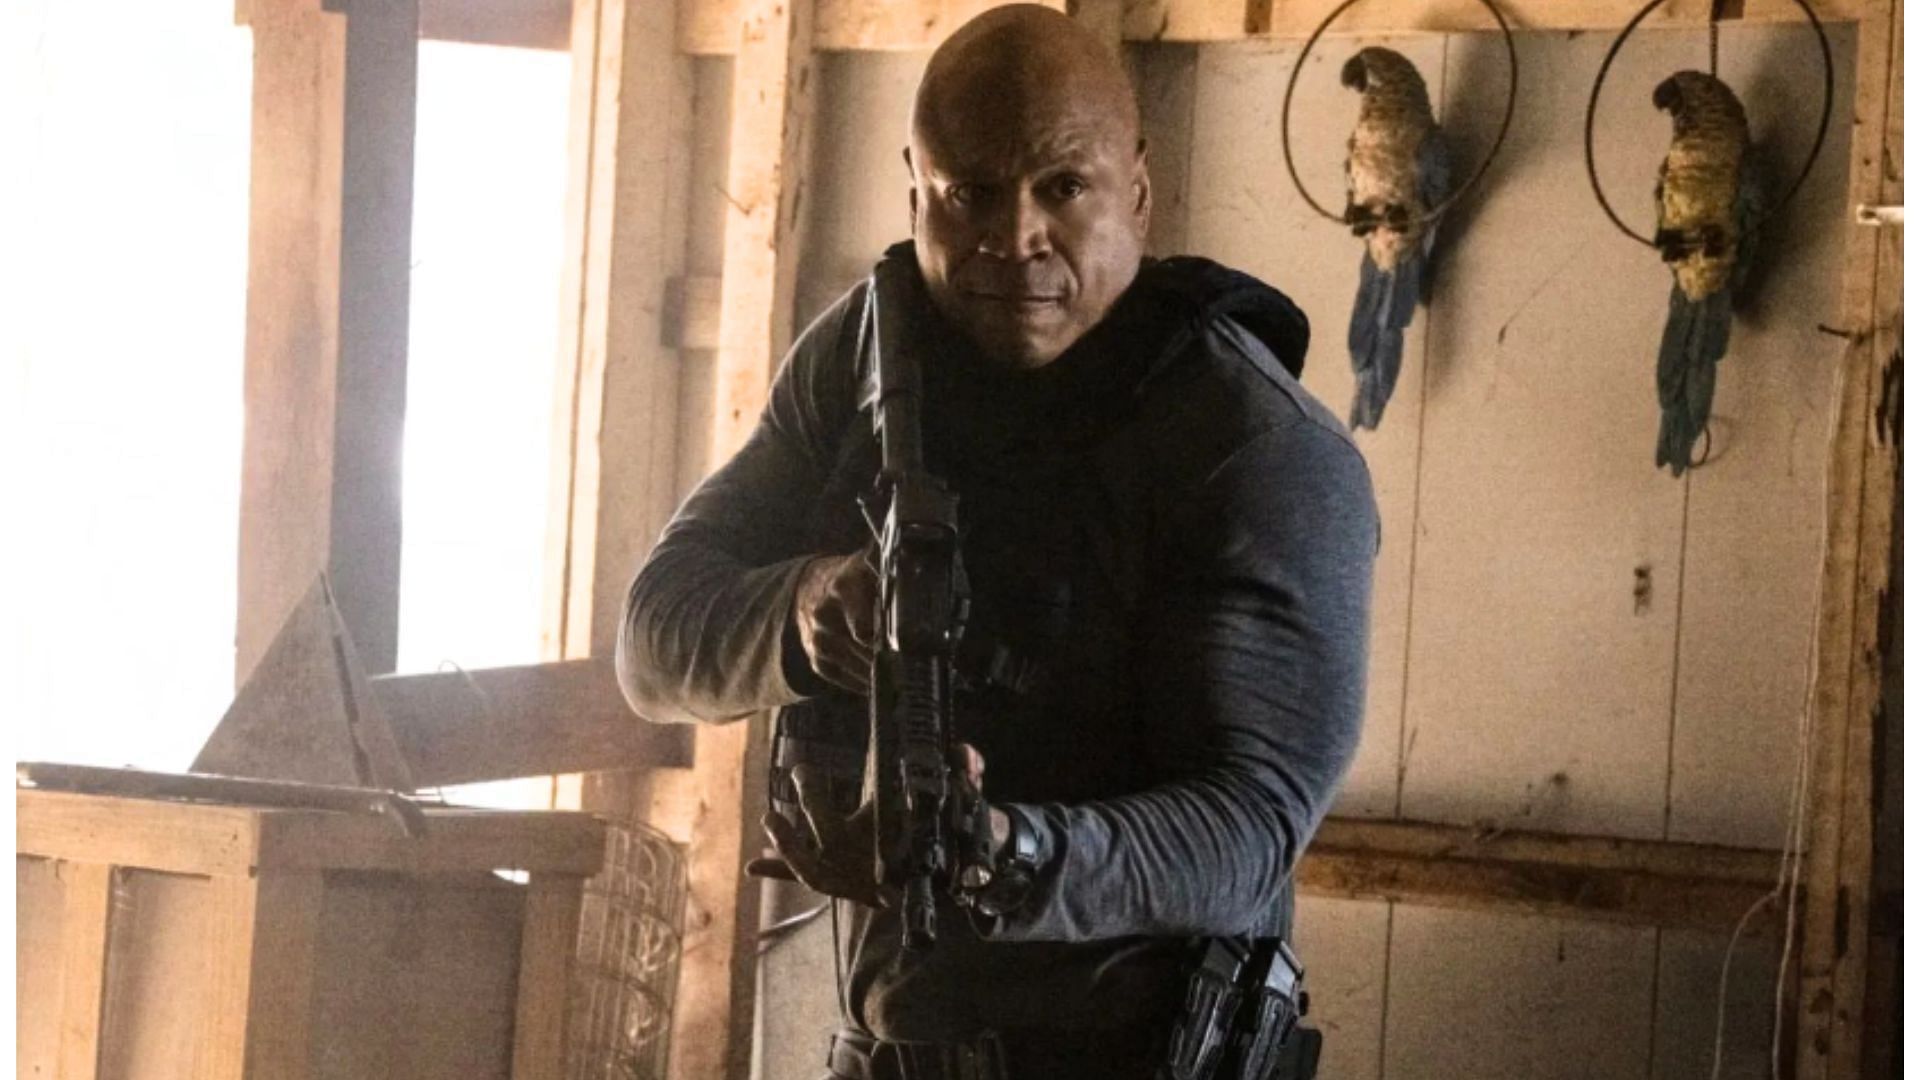 Agent Sam Hanna in a scene from the show. (Image via Instagram)